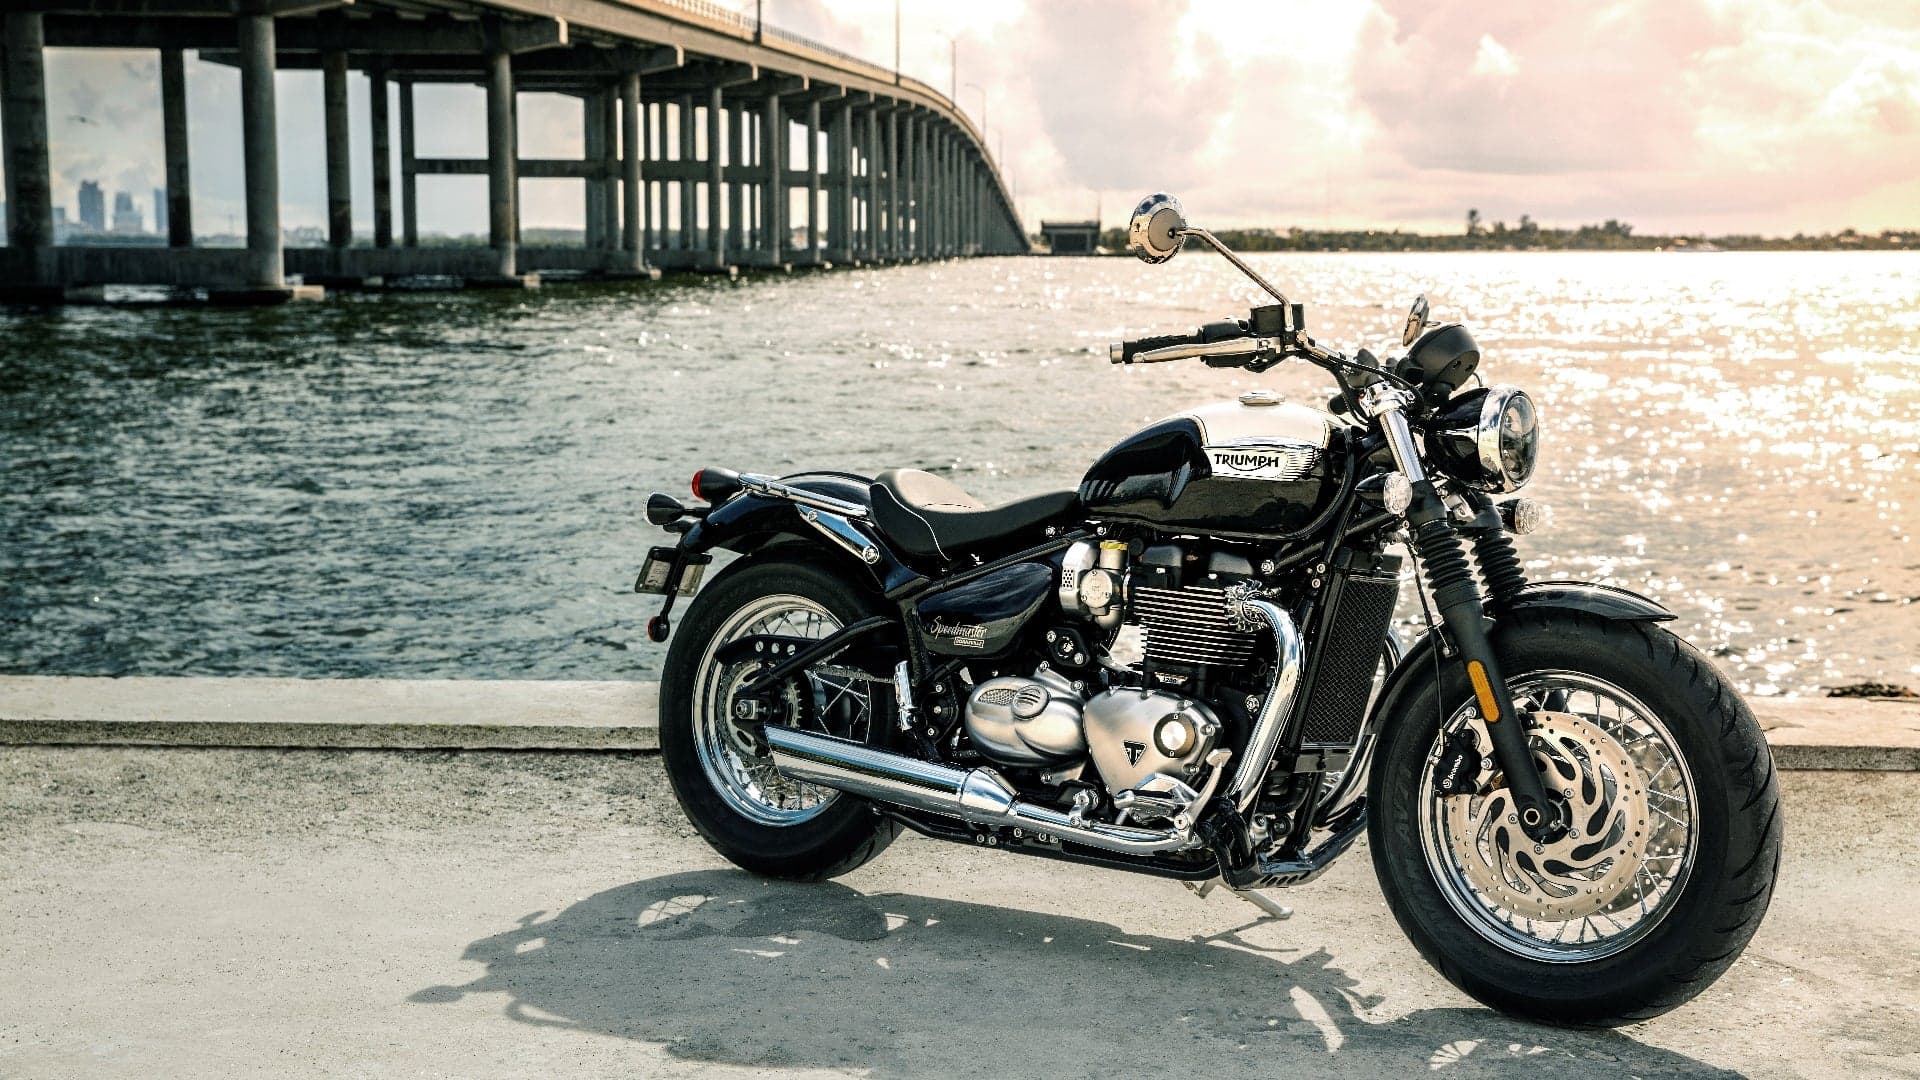 This is the All-New Triumph Bonneville Speedmaster